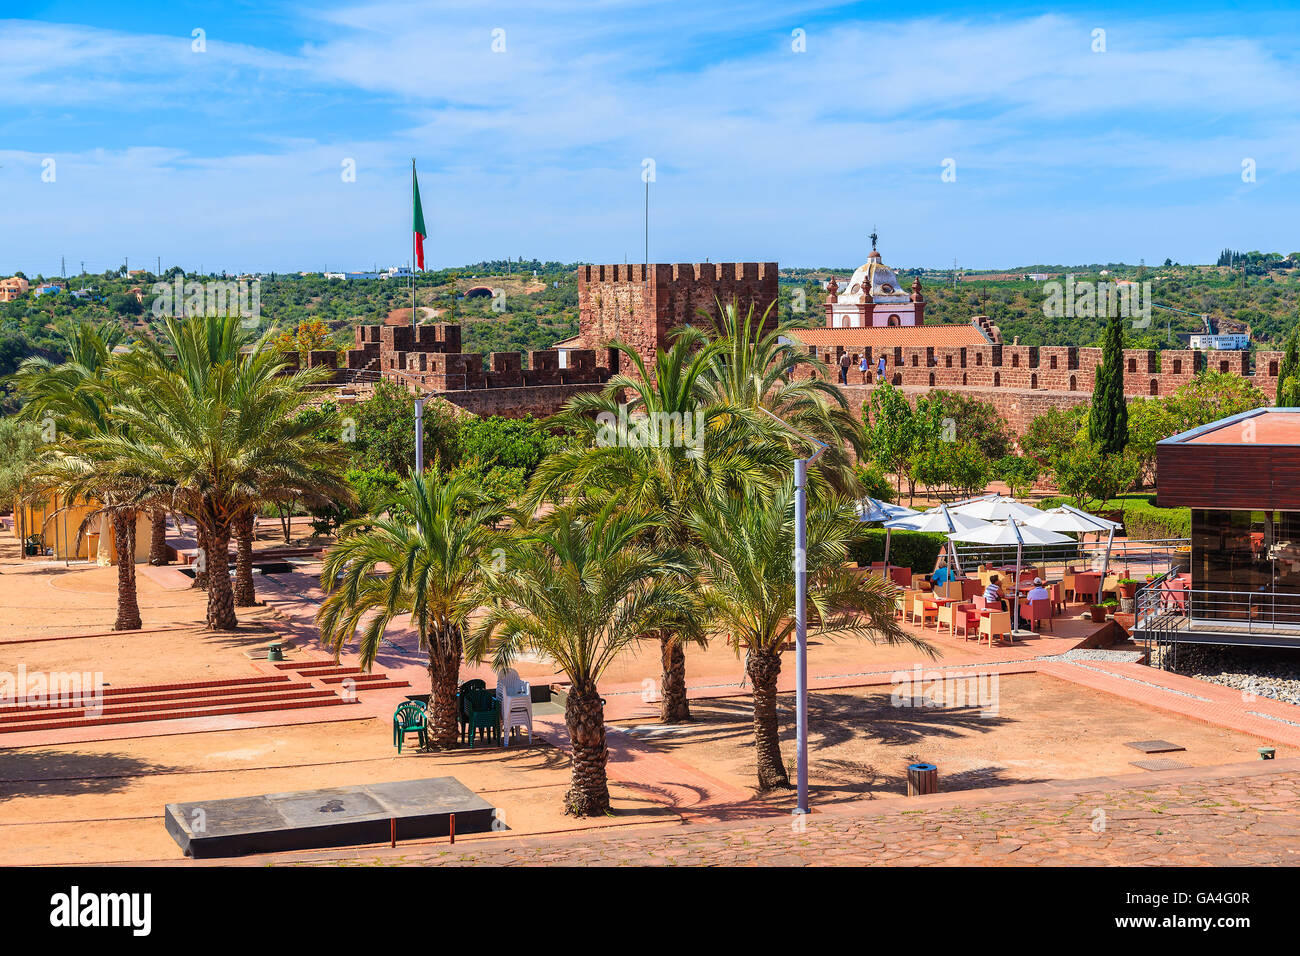 Palm trees on square of medieval castle in Silves town, Algarve region, Portugal Stock Photo